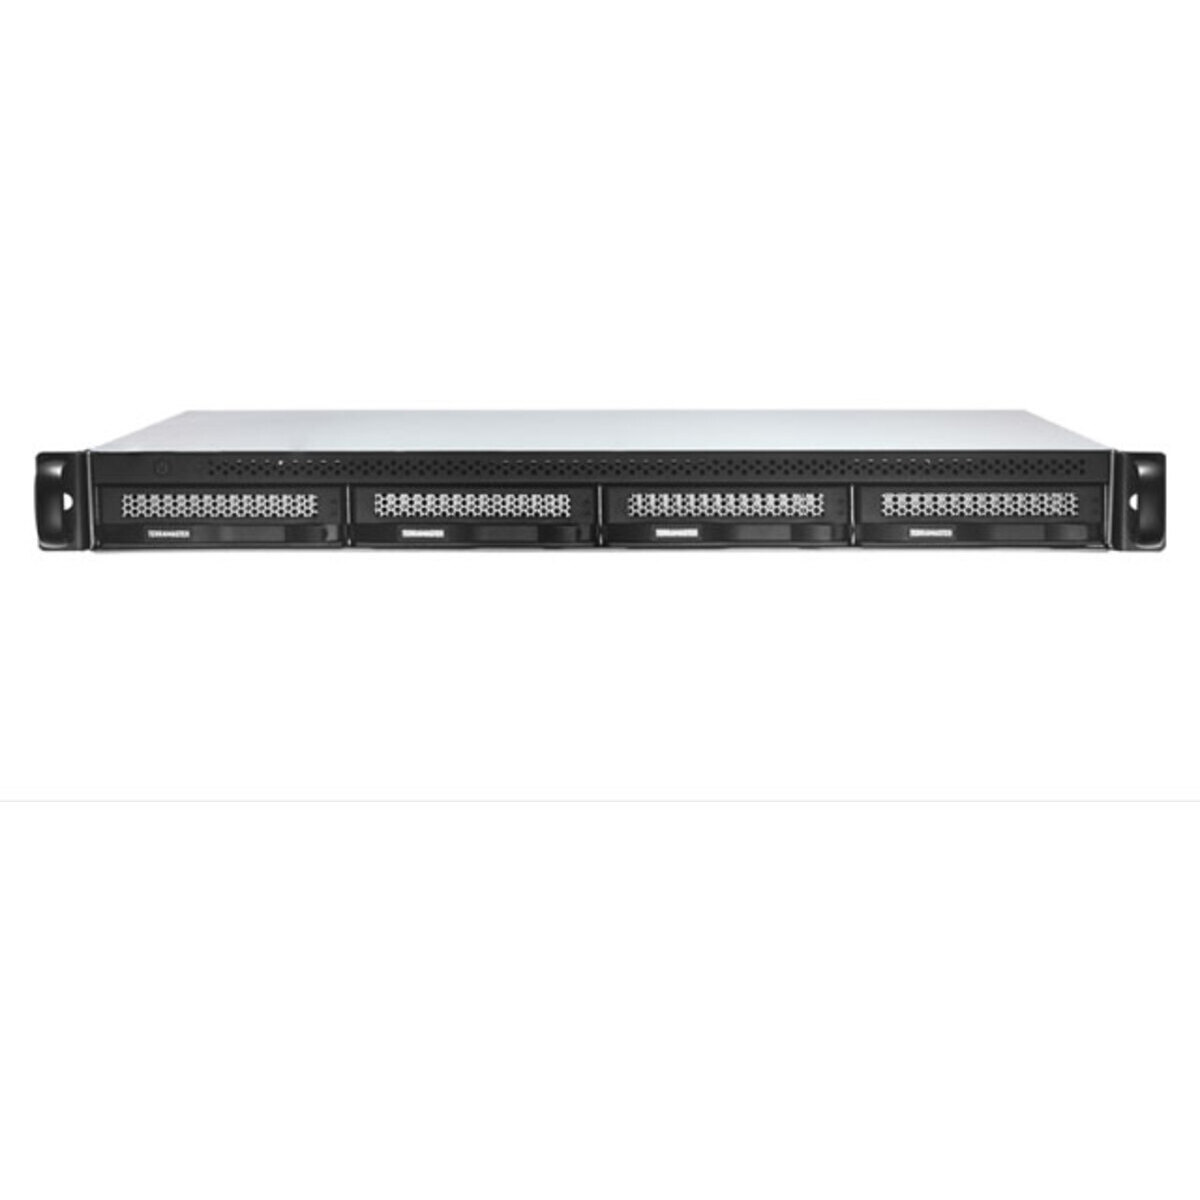 TerraMaster U4-423 1tb 4-Bay RackMount Multimedia / Power User / Business NAS - Network Attached Storage Device 2x500gb Sandisk Ultra 3D SDSSDH3-500G 2.5 560/520MB/s SATA 6Gb/s SSD CONSUMER Class Drives Installed - Burn-In Tested - FREE RAM UPGRADE U4-423